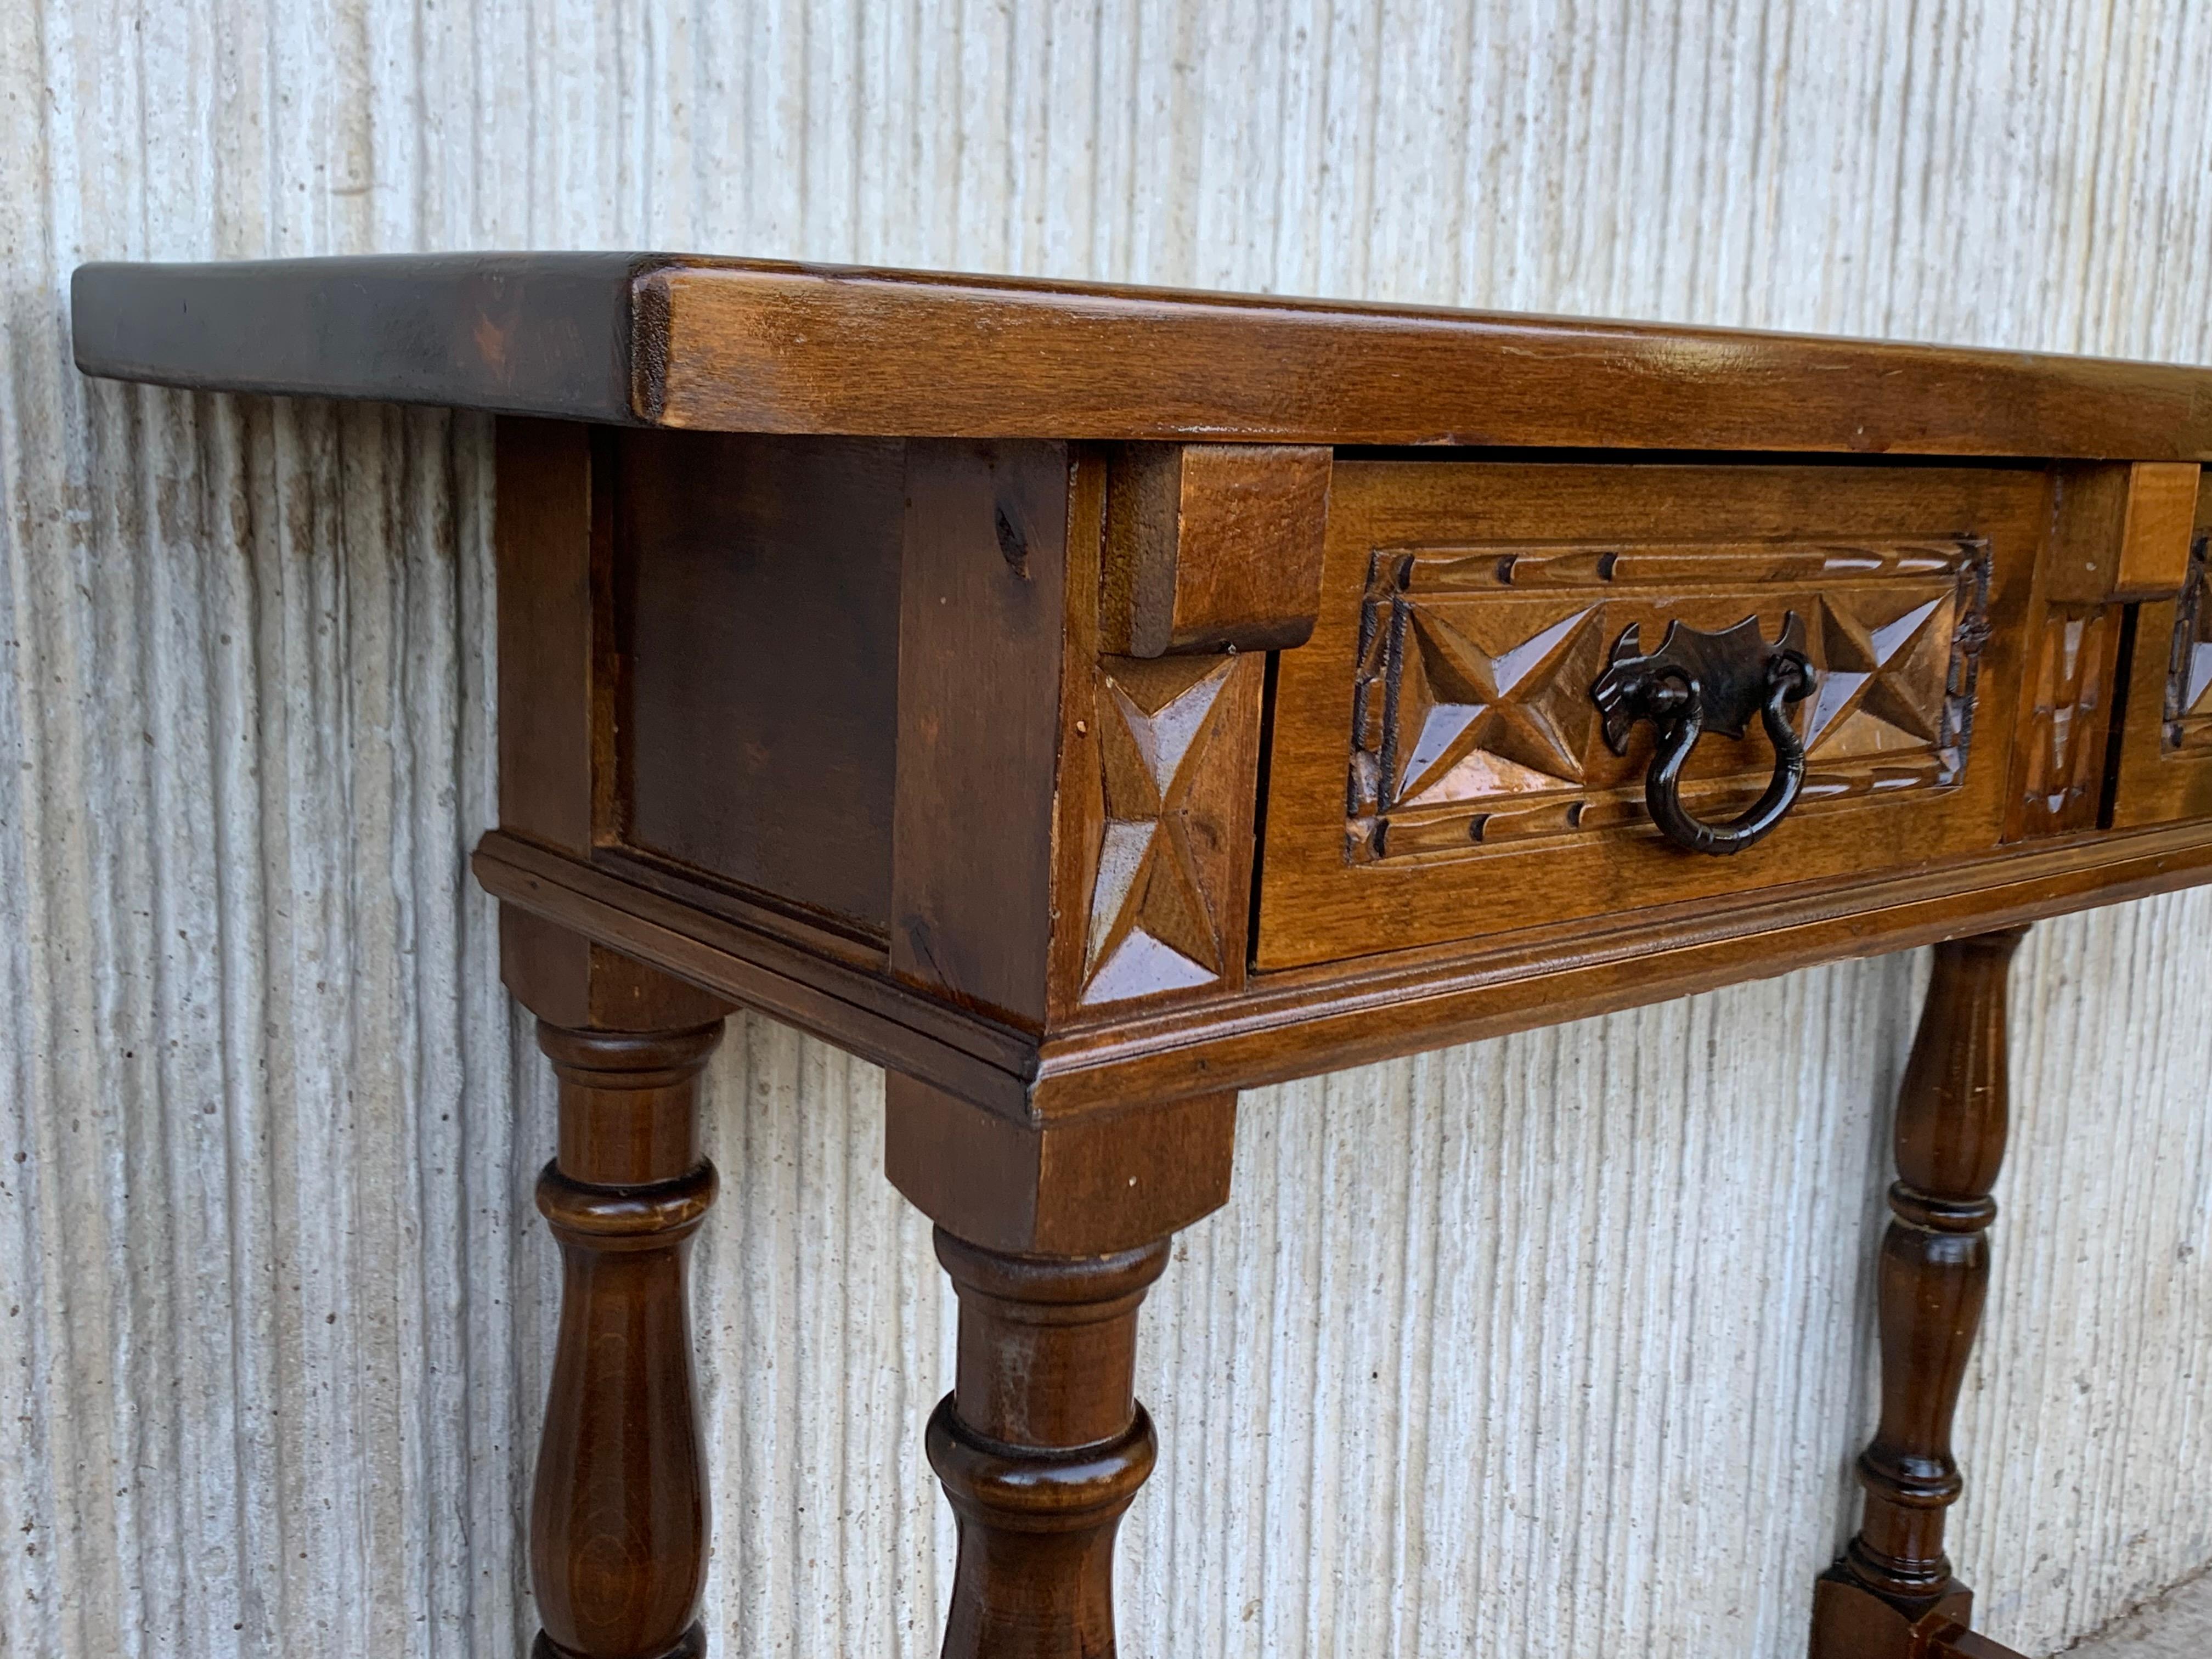 Iron 20th Century Spanish Tuscan Console Table with Two Drawers and Turned Legs